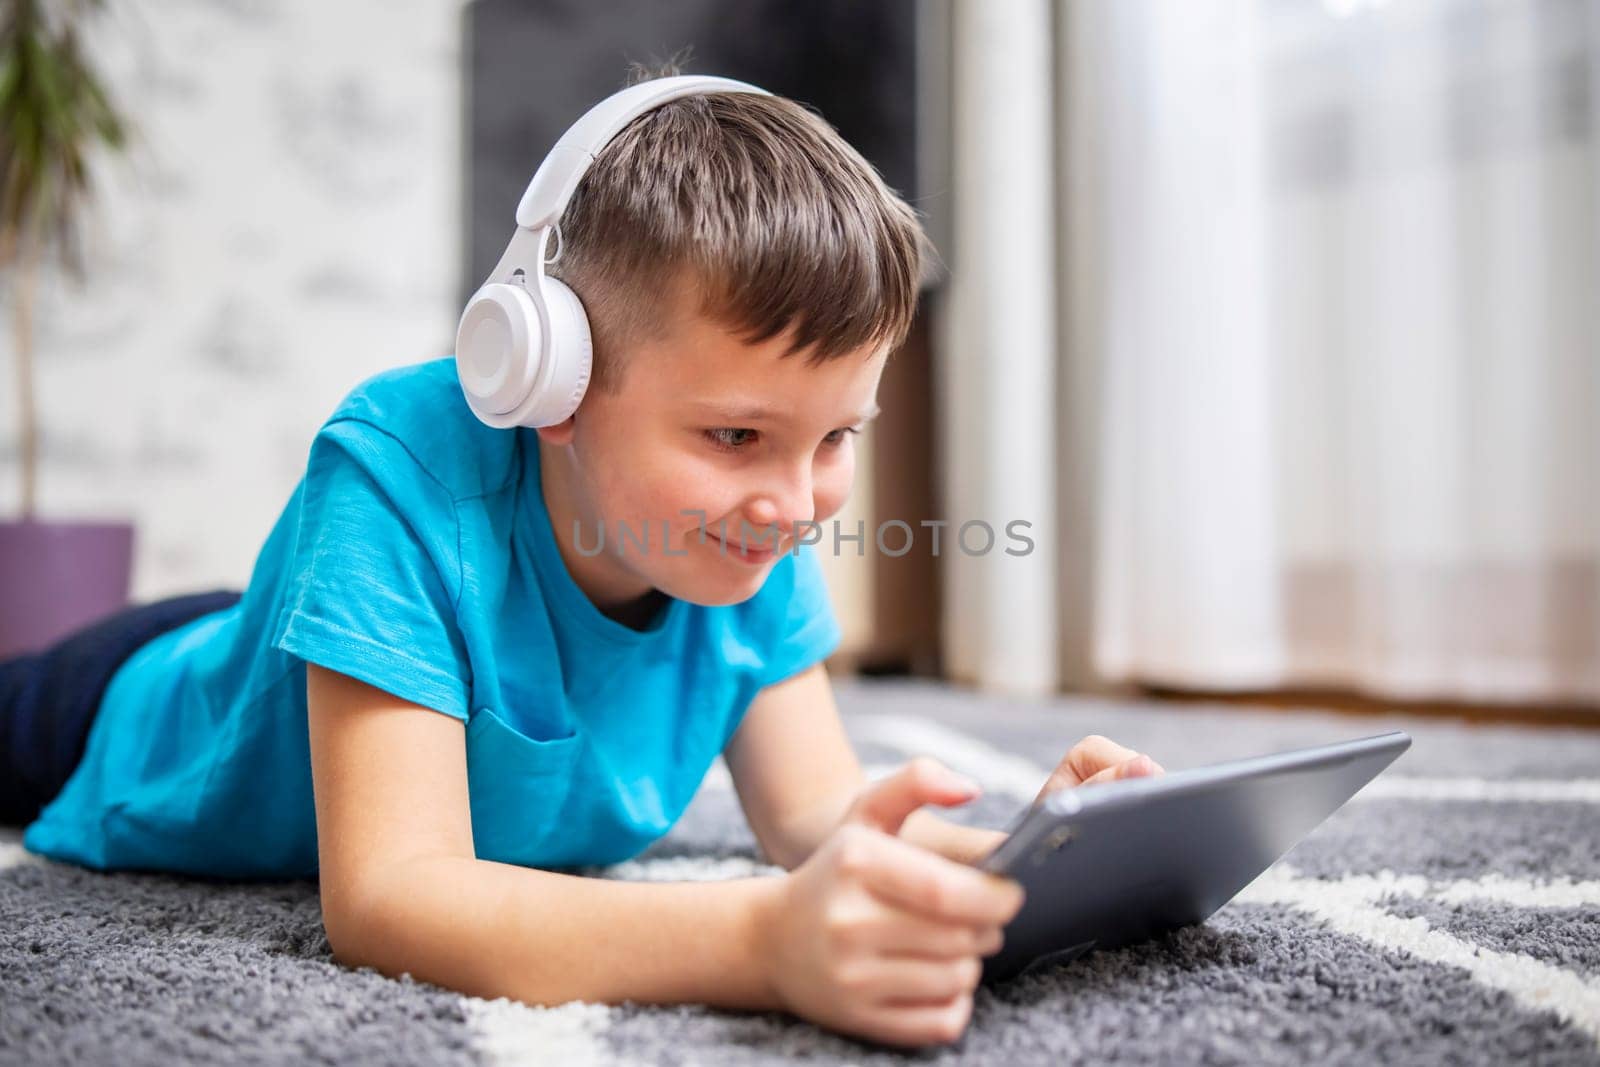 Boy lying on carpet wearing headphones and using tablet. Casual indoor leisure activity. Child technology use concept